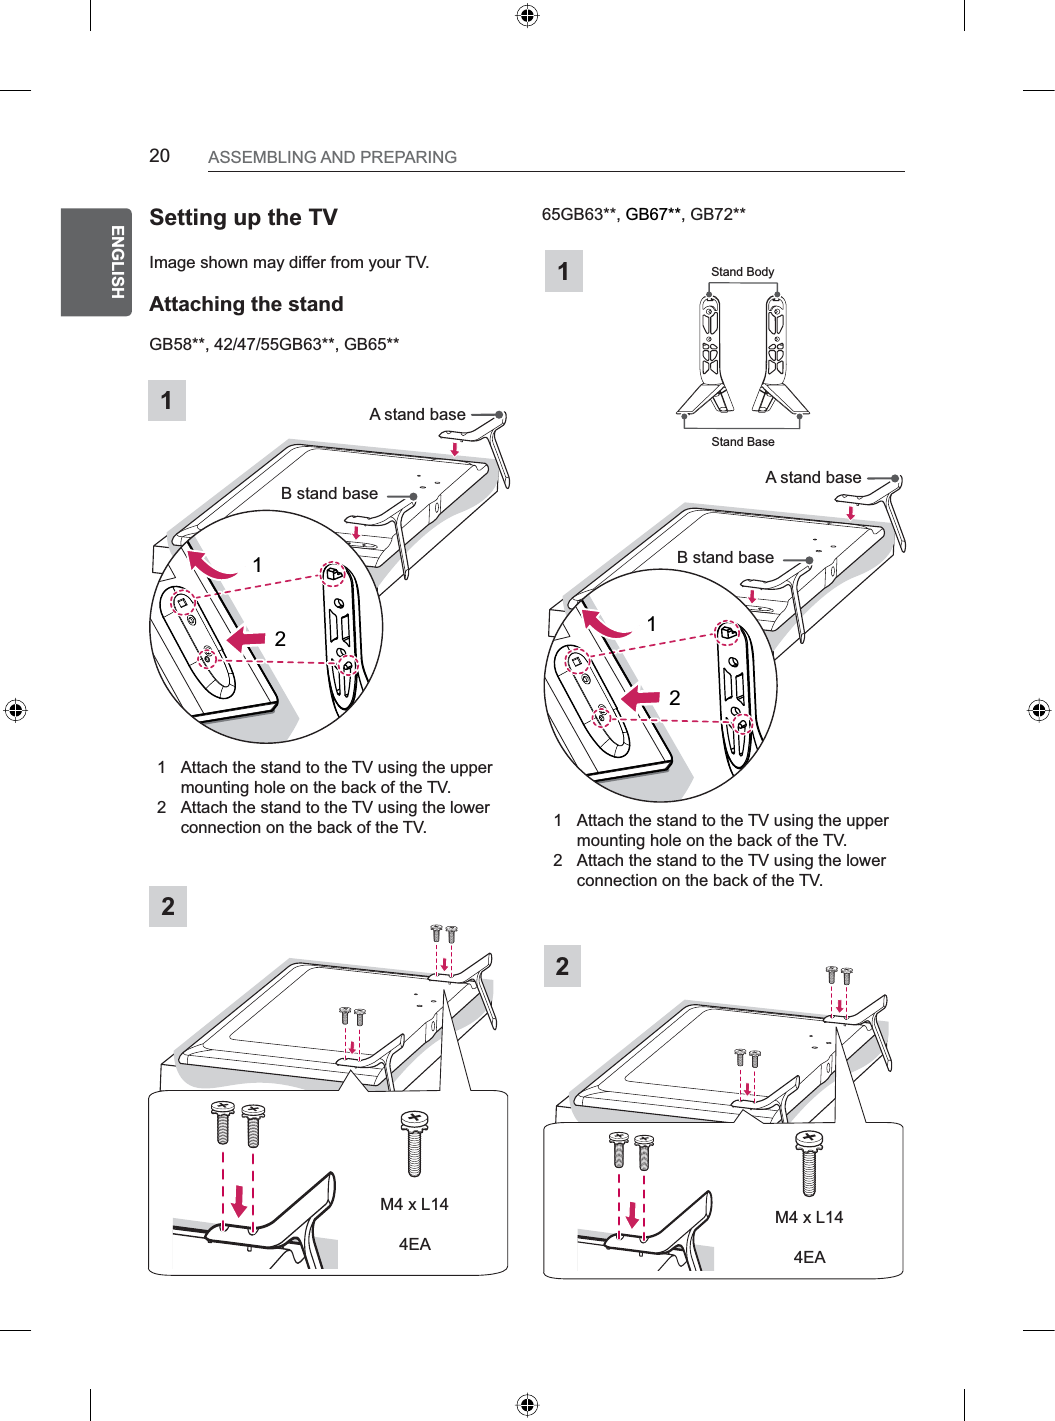 20ENGENGLISHASSEMBLING AND PREPARINGGB58**, 42/47/55GB63**, GB65**Setting up the TVImage shown may differ from your TV.Attaching the stand12Stand BaseStand Body65GB63**, GB67**, GB72**2M4 x L144EAM4 x L144EA1B stand base12A stand baseB stand baseA stand base121 Attach the stand to the TV using the upper mounting hole on the back of the TV.2 Attach the stand to the TV using the lower connection on the back of the TV. 1 Attach the stand to the TV using the upper mounting hole on the back of the TV.2 Attach the stand to the TV using the lower connection on the back of the TV.